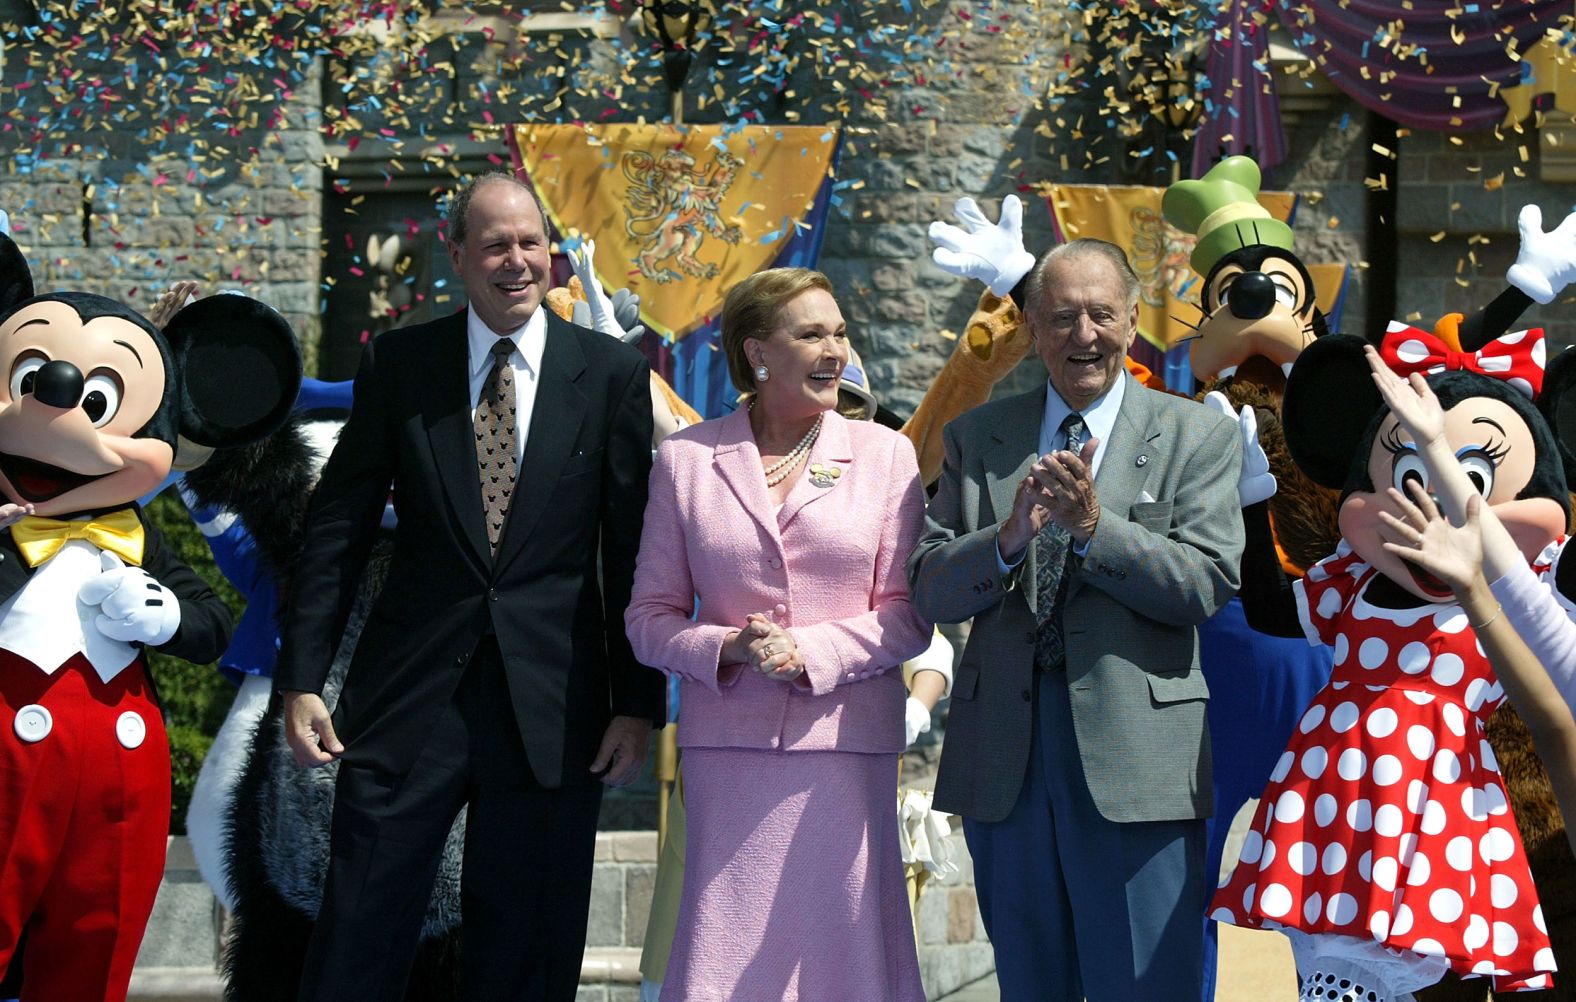 Andrews attends a 2004 event as Disneyland announced plans for its 50th anniversary.